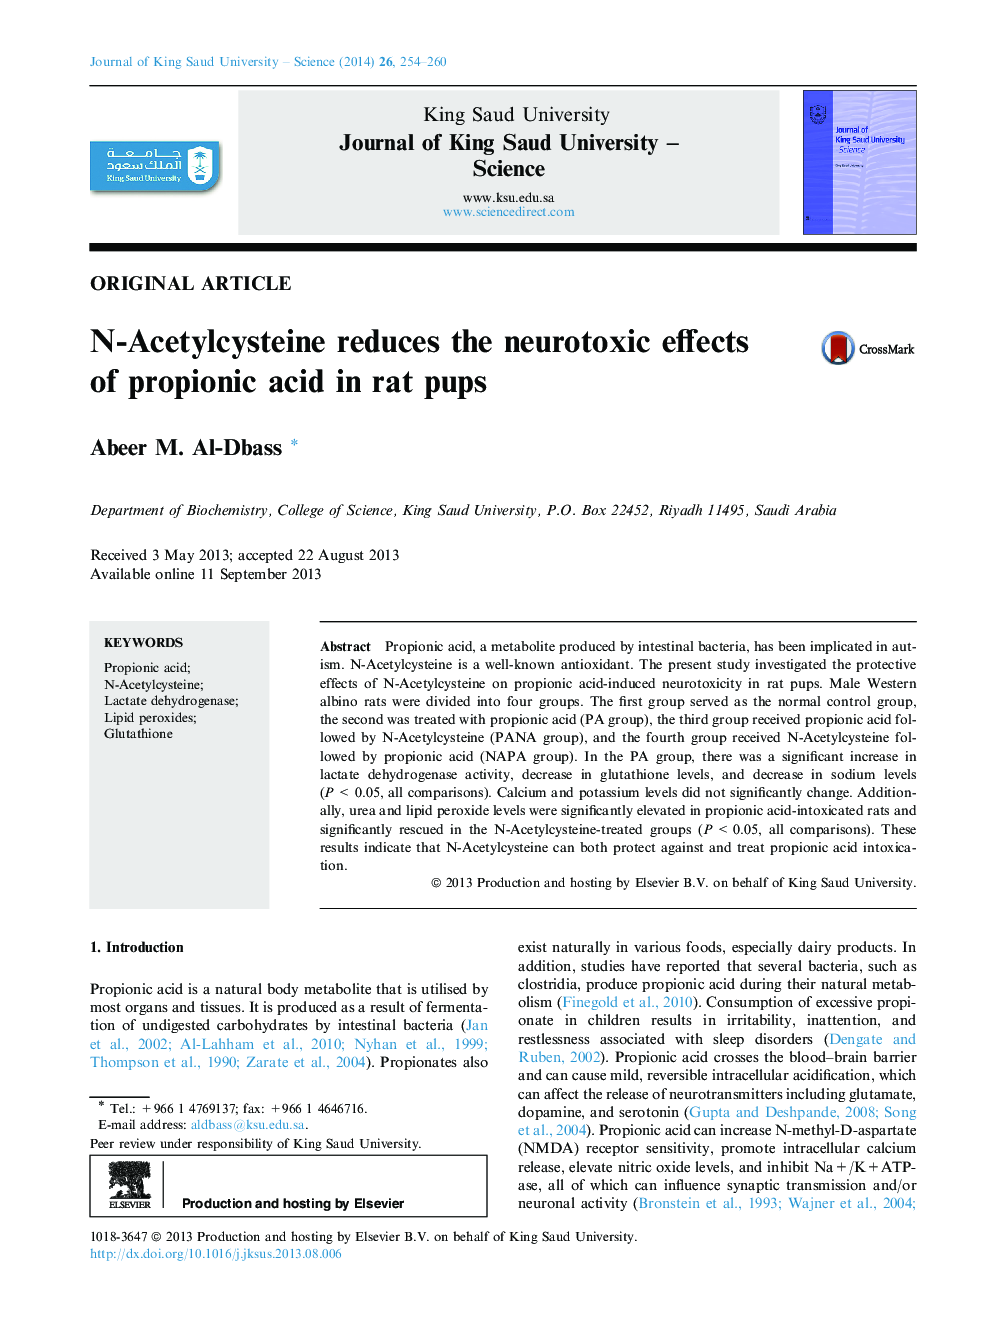 N-Acetylcysteine reduces the neurotoxic effects of propionic acid in rat pups 